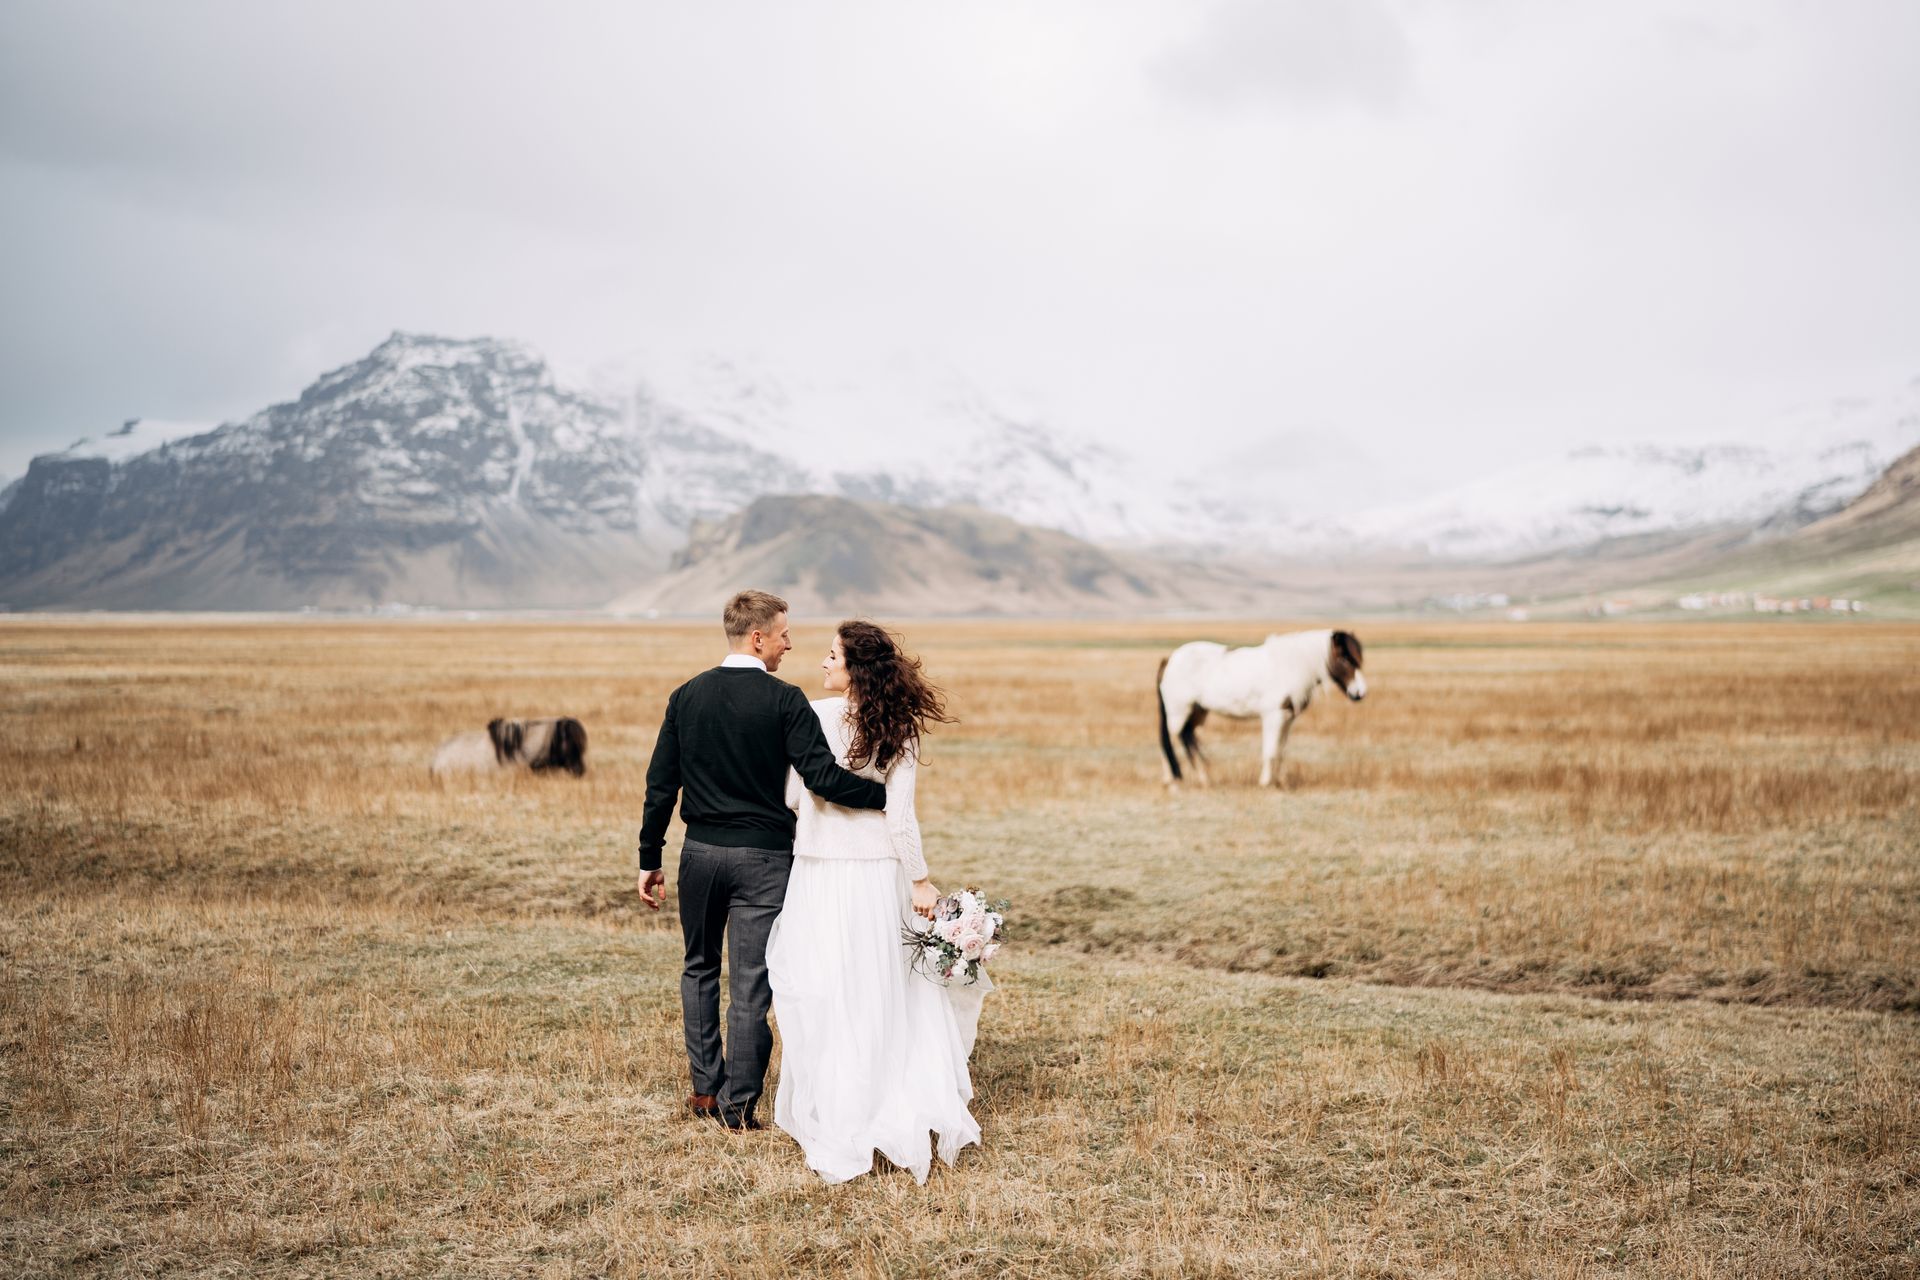 A bride and groom embracing in a field, near a horse, with mountains in the distance